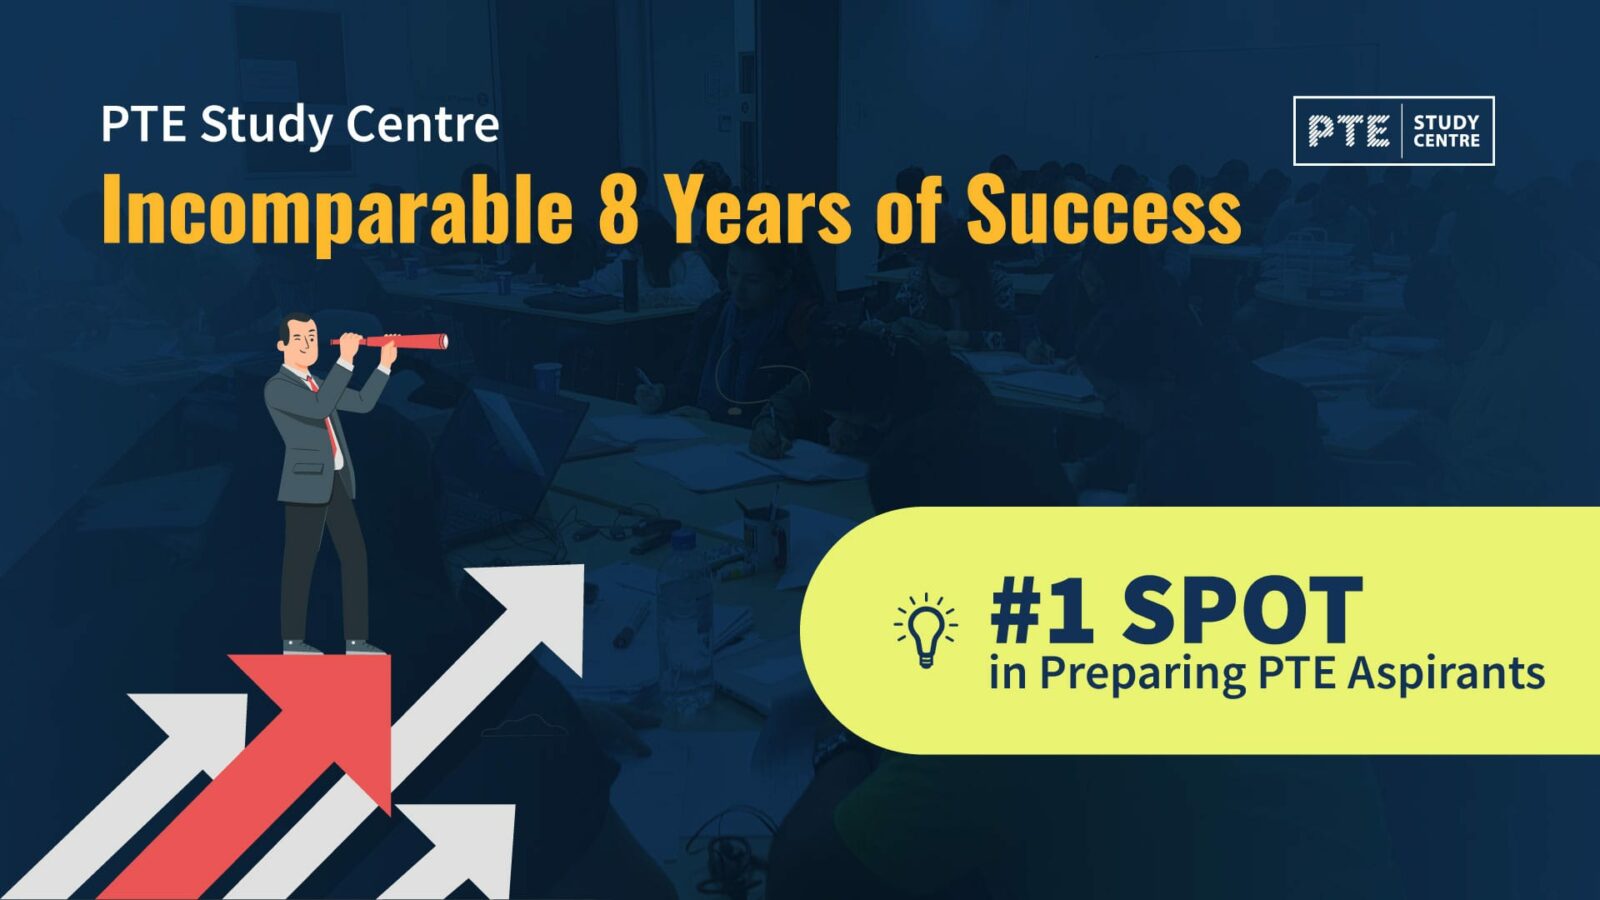 PTE Study Centre: Incomparable 8 Years of Success image